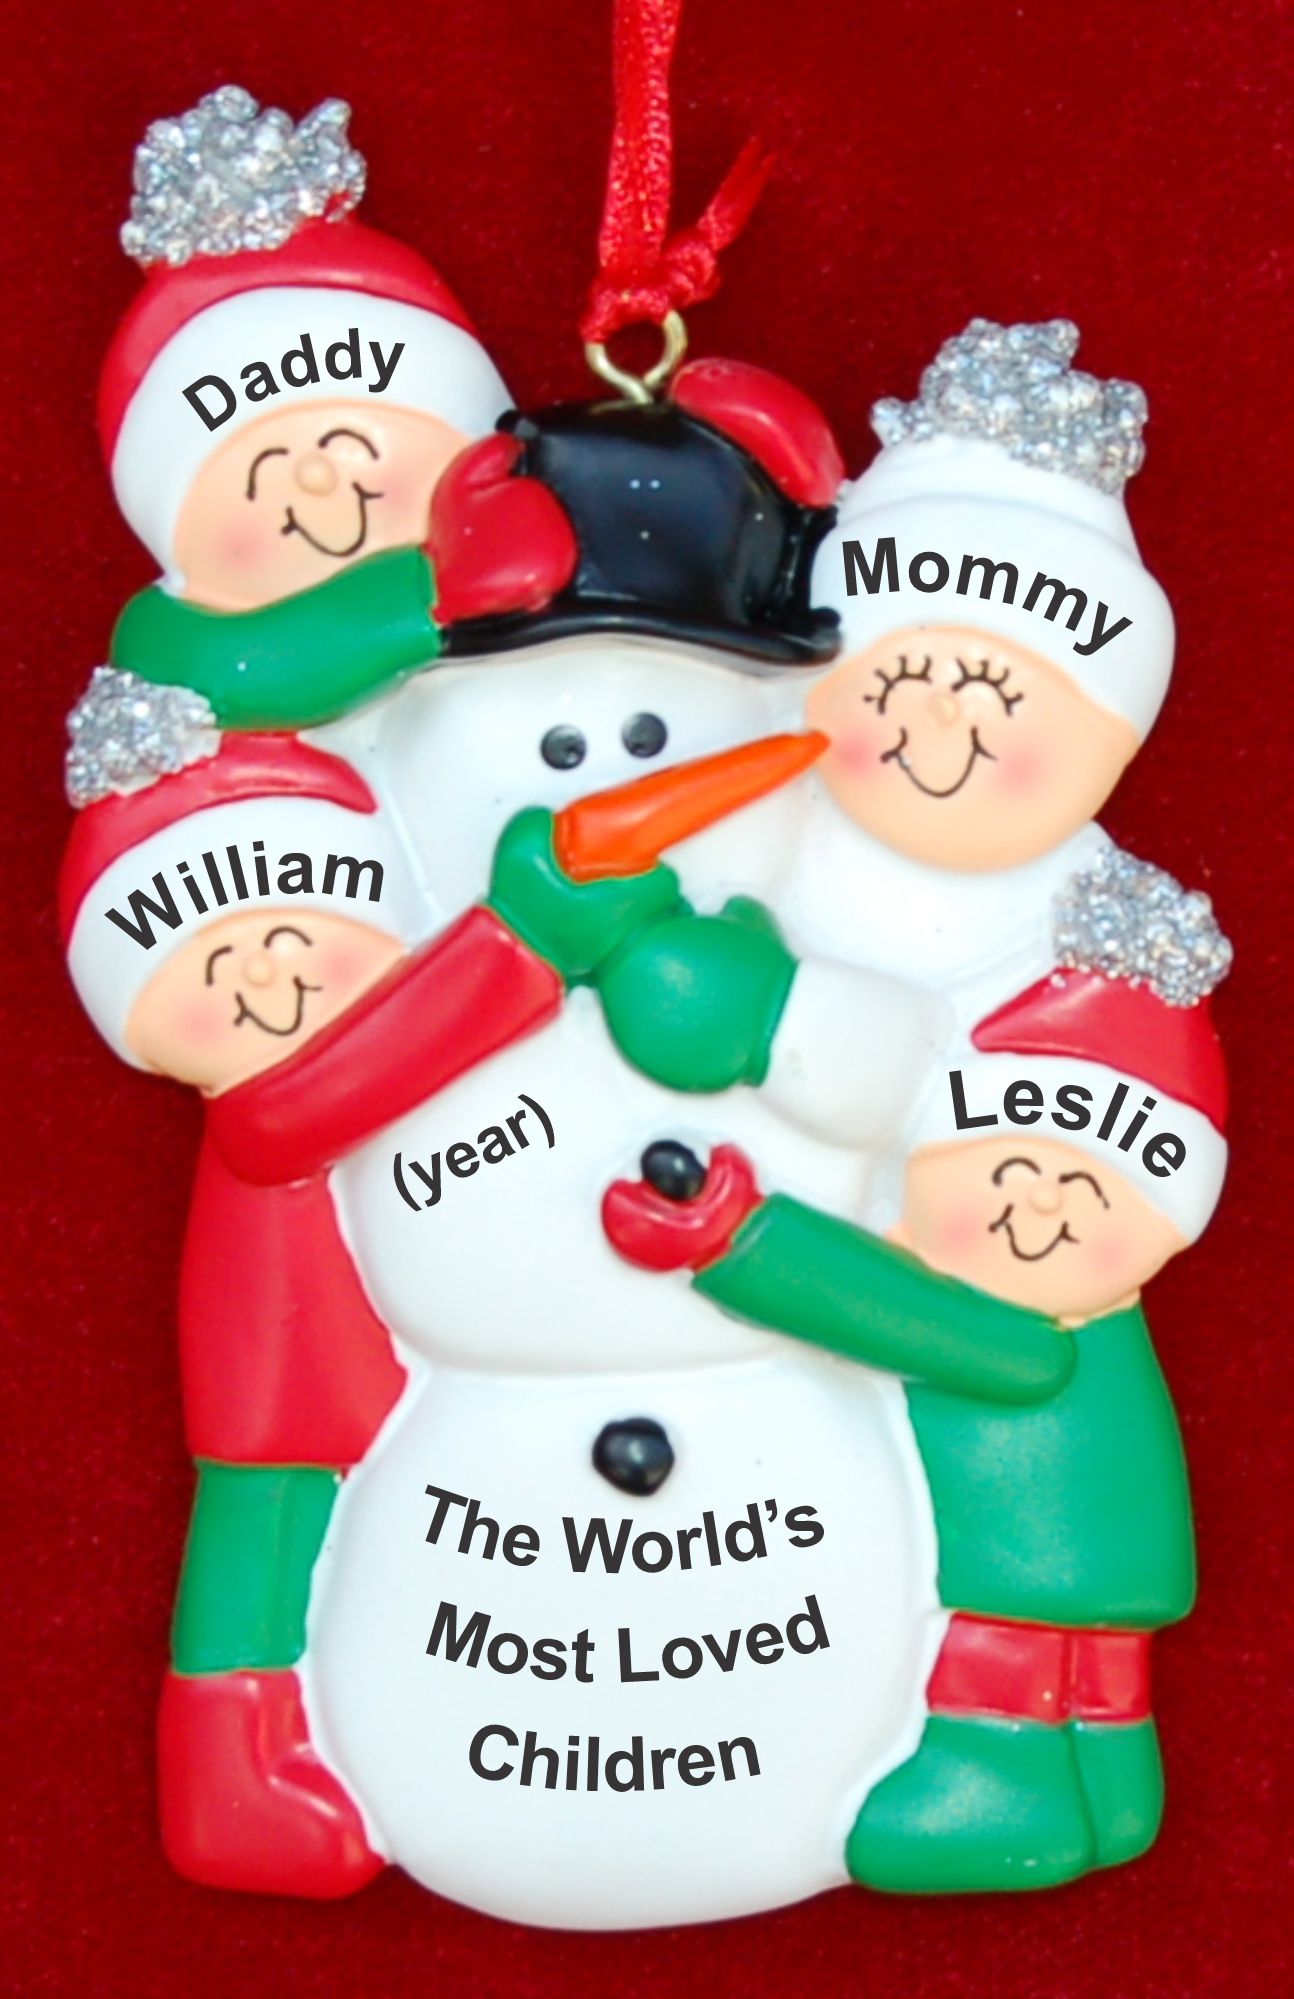 Adopted Christmas Ornament Family of 3 Adopts Second Child Personalized by RussellRhodes.com